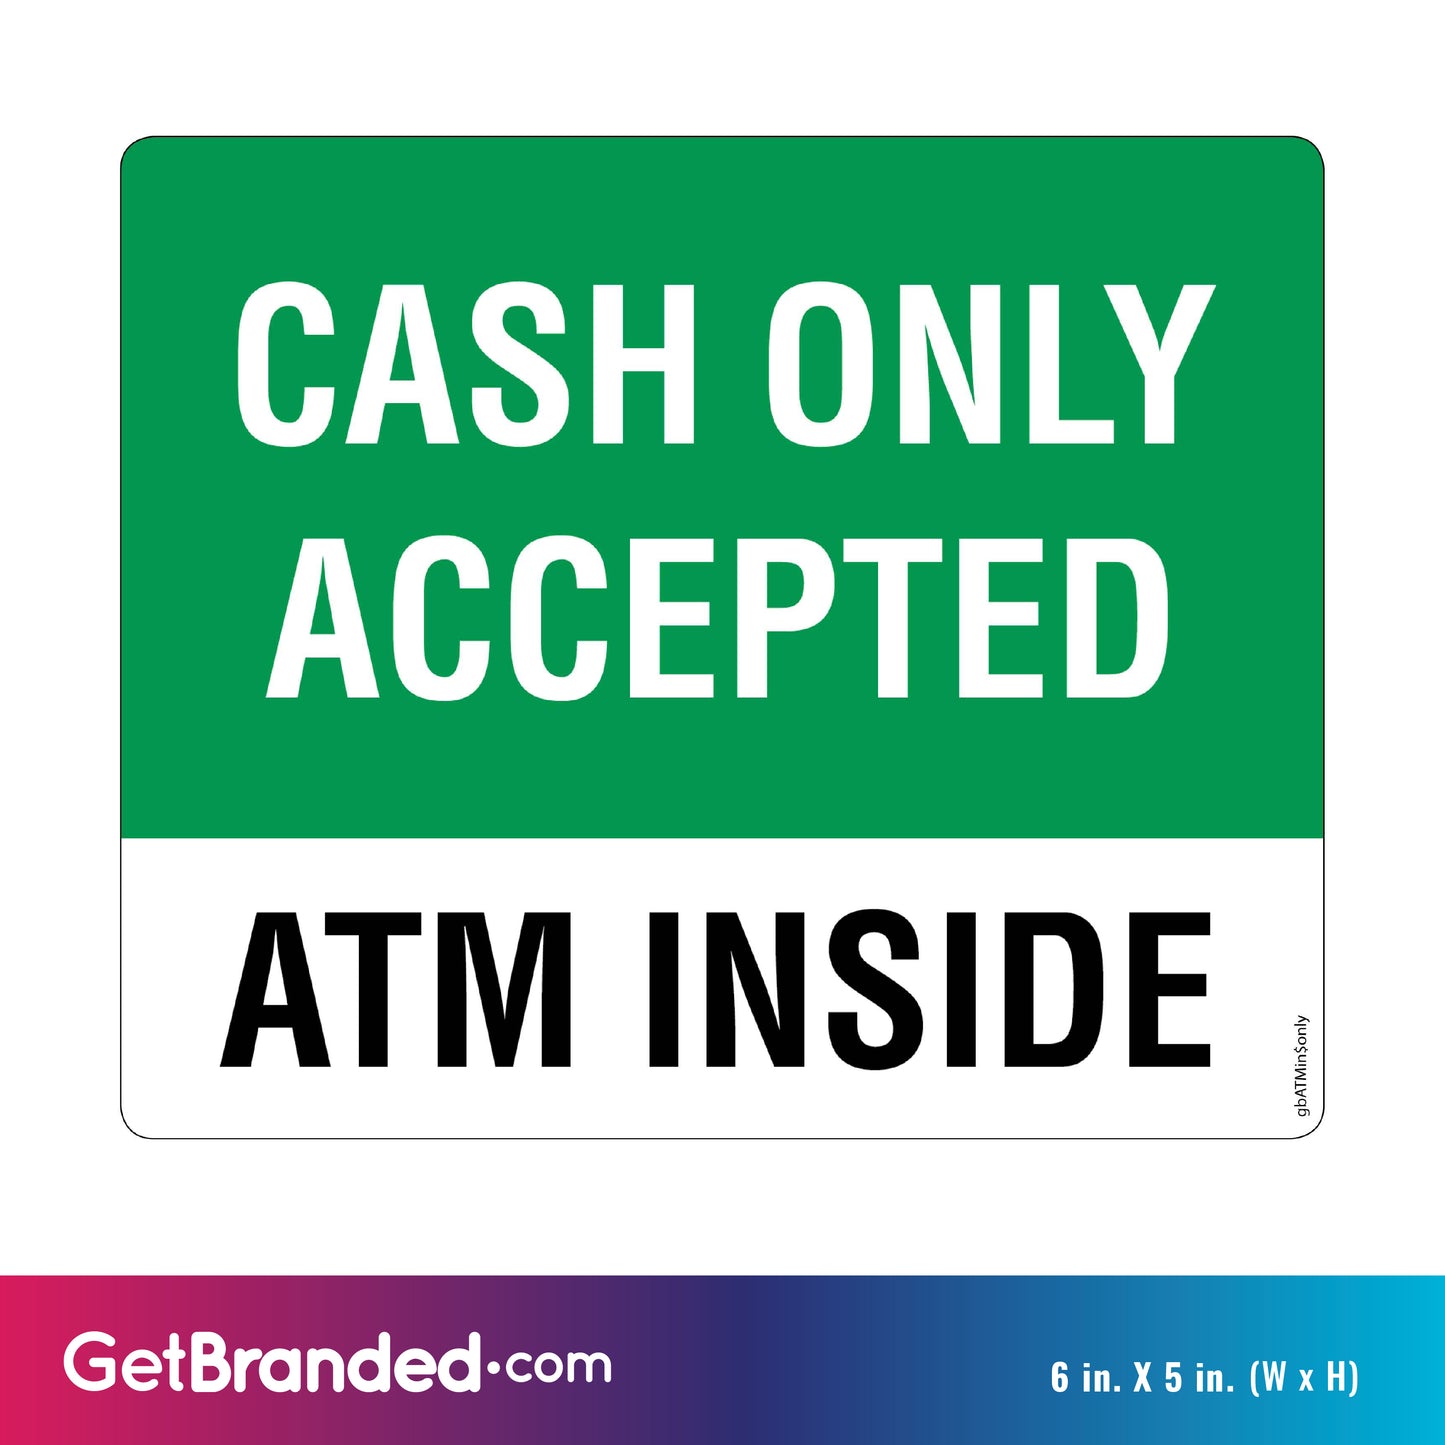 Large Cash Only Accepted - ATM Inside Decal size guide. 6 inches by 5 inches in size.